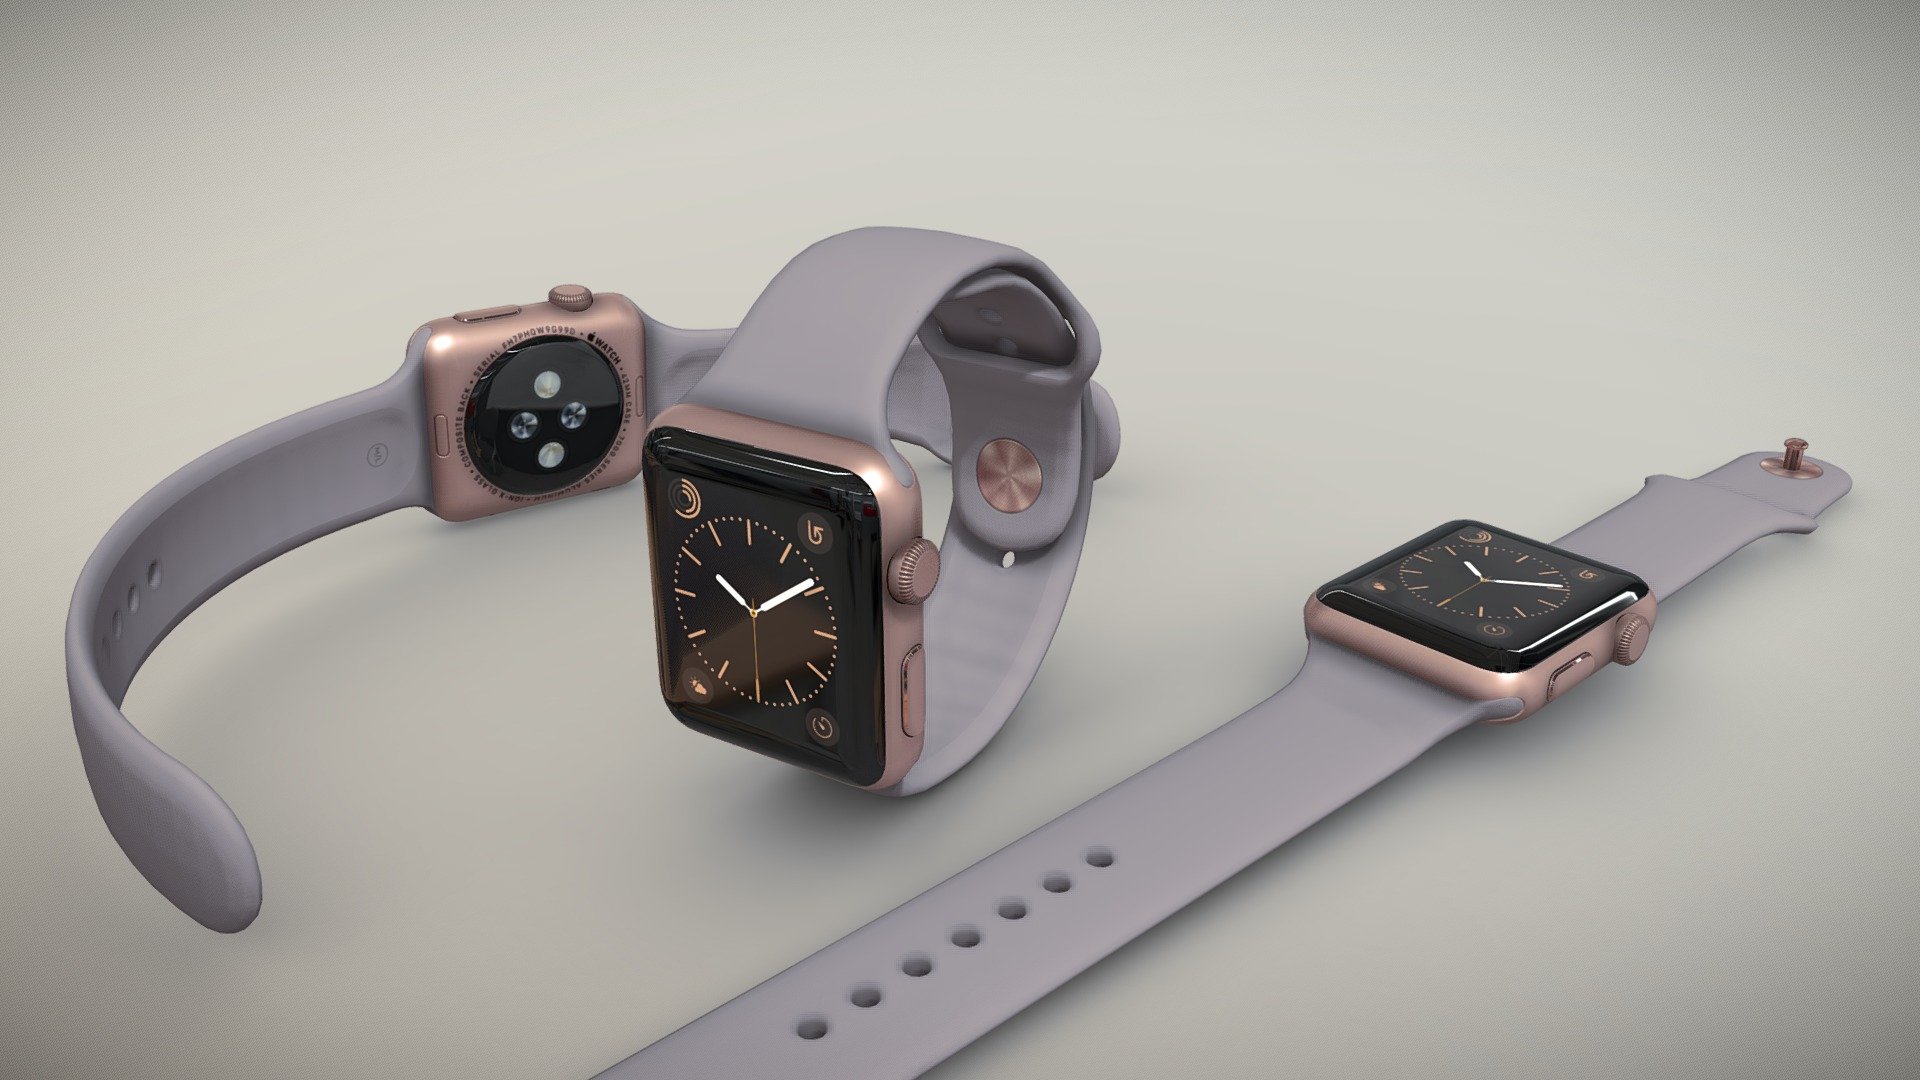 •   Let me present to you high-quality low-poly 3D model Apple Watch 42mm Rose Gold Aluminum Case with Lavender Sport Band. Modeling was made with ortho-photos of real watch that is why all details of design are recreated most authentically.

•    This model consists of two meshes, it is low-polygonal and it has only one material. 

•   The total of the main textures is 5. Resolution of all textures is 4096 pixels square aspect ratio in .png format. Also there is original texture file .PSD format in separate archive.

•   Polygon count of the model is – 4294.

•   The model has correct dimensions in real-world scale. All parts grouped and named correctly.

•   To use the model in other 3D programs there are scenes saved in formats .fbx, .obj, .DAE, .max (2010 version).

Note: If you see some artifacts on the textures, it means compression works in the Viewer. We recommend setting HD quality for textures. But anyway, original textures have no artifacts 3d model